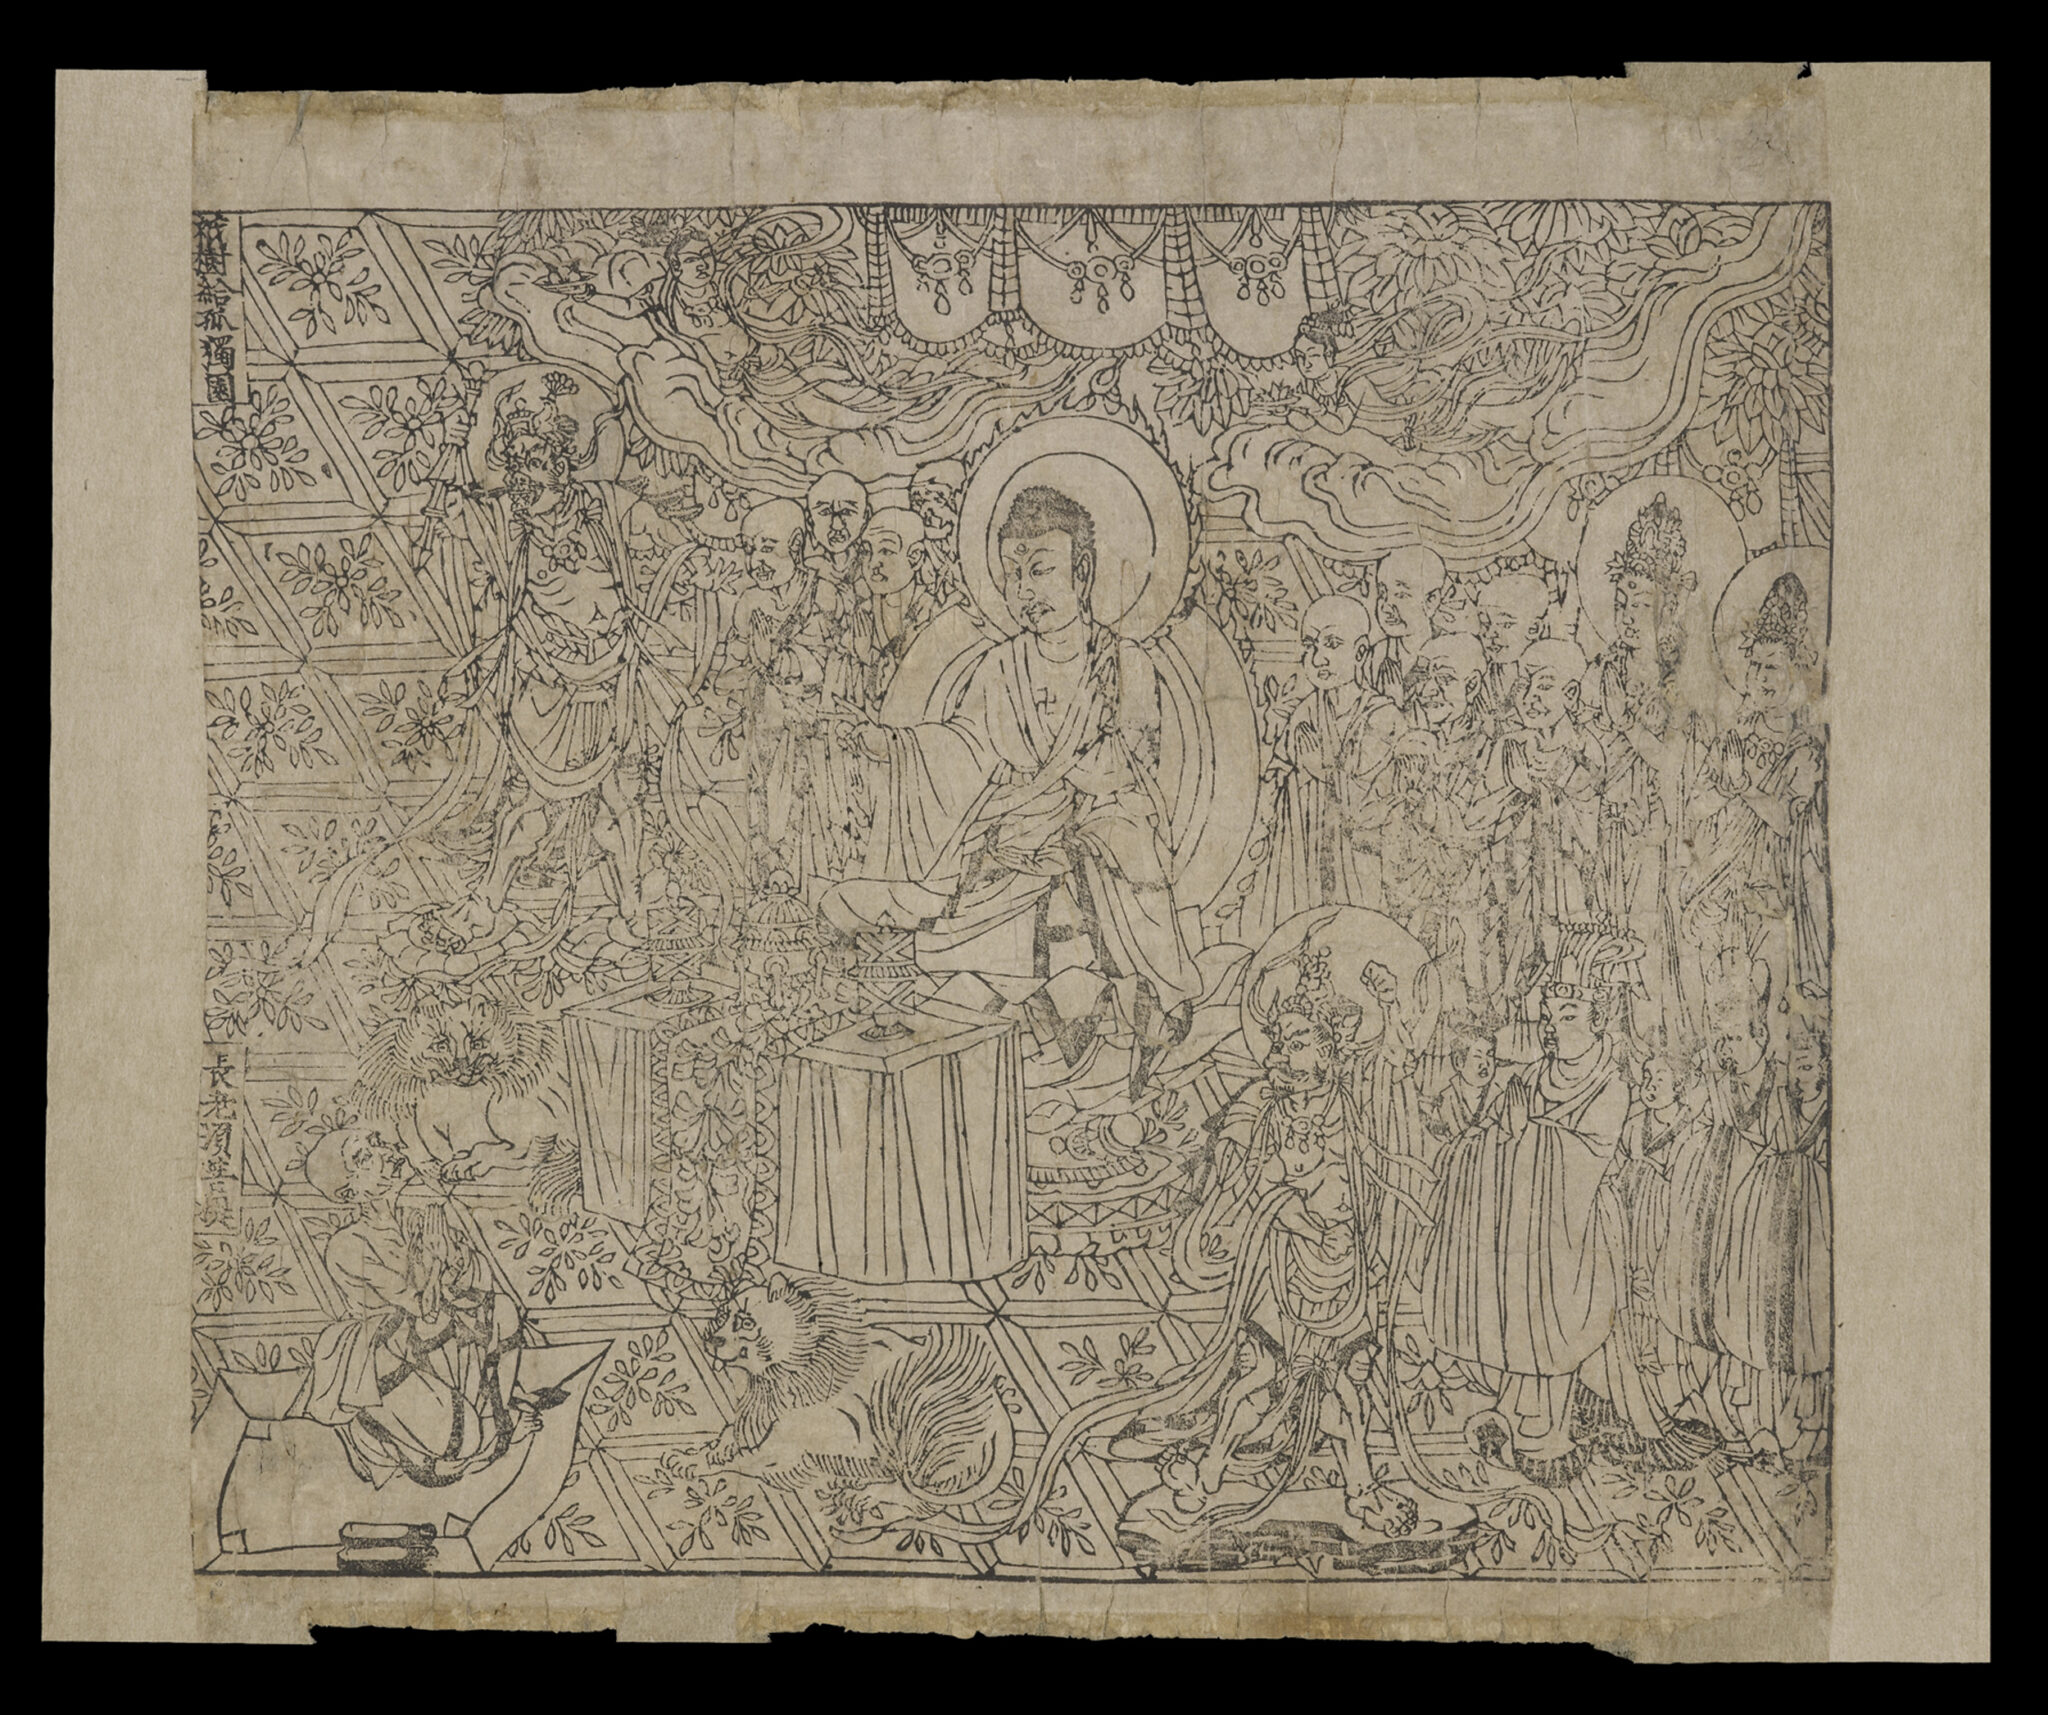 Line drawing on beige paper depicting seated Buddha and retinue amid profusion of elaborate patterns and forms